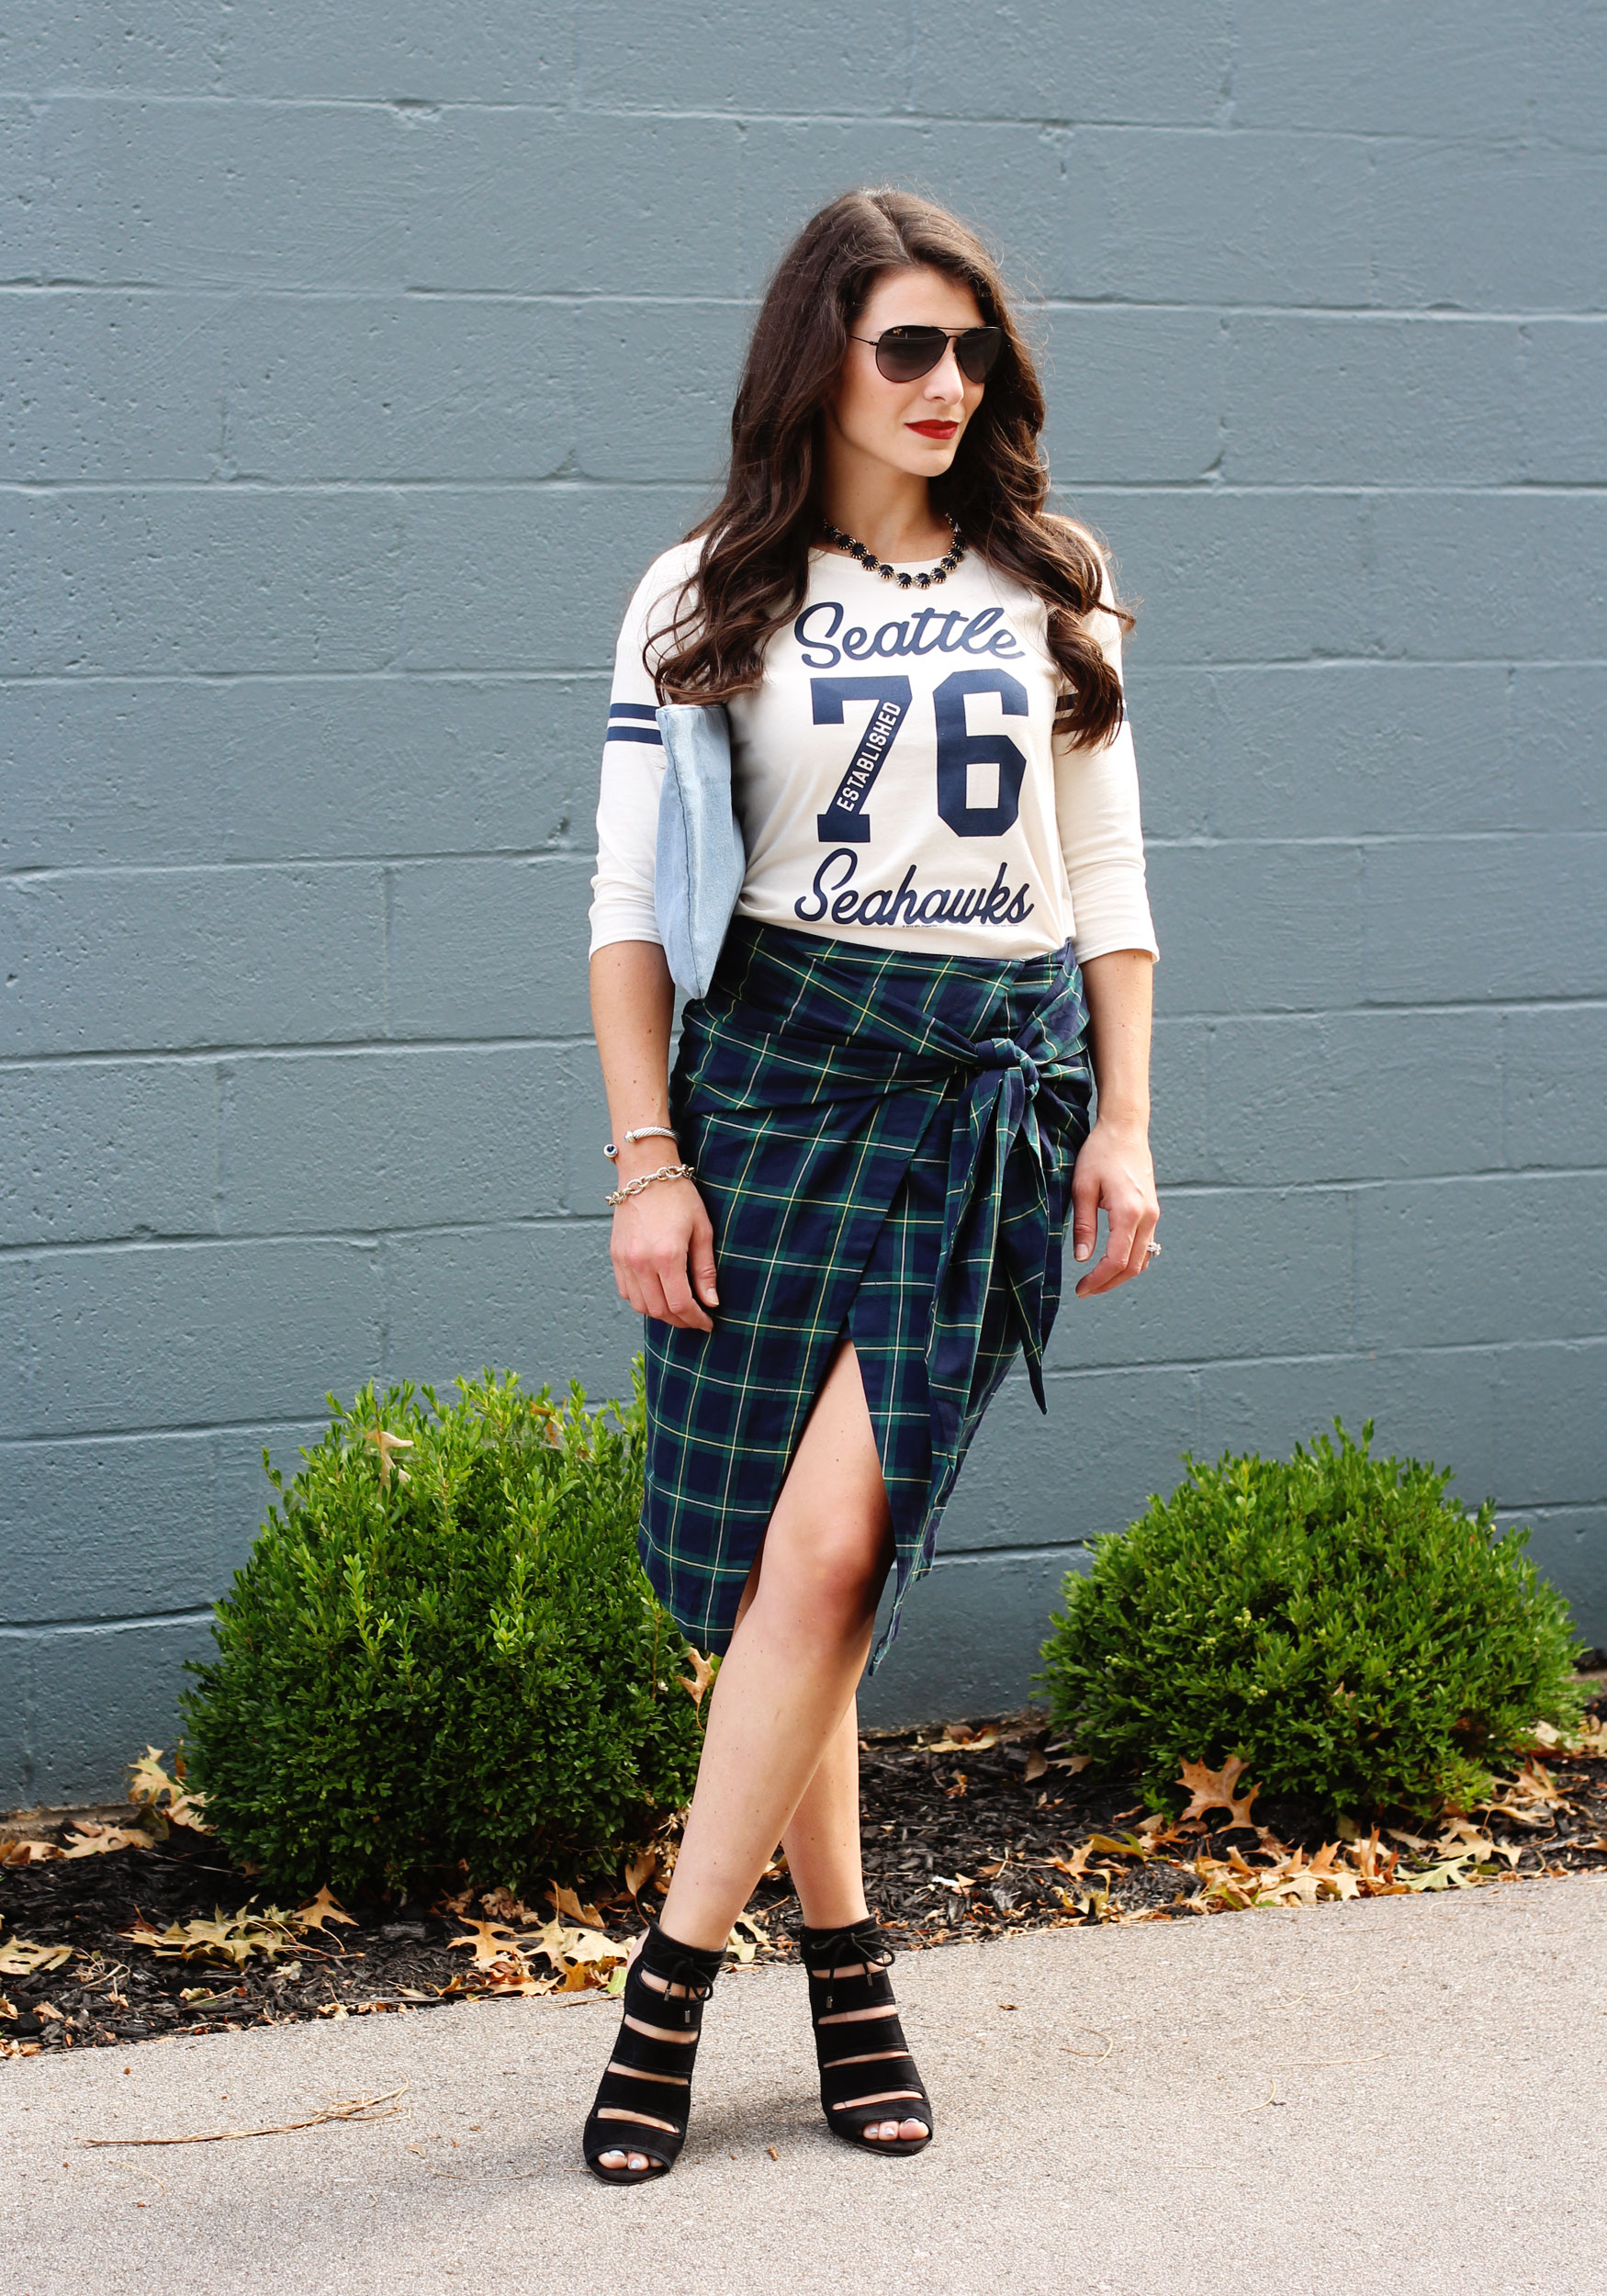 Fall Fashion, JOA Tie Front Skirt, Plaid Skirt, Seattle Seahawks Raglan, Seychelles 'Play Along' Pumps, Forever 21 Unstructured Denim Clutch